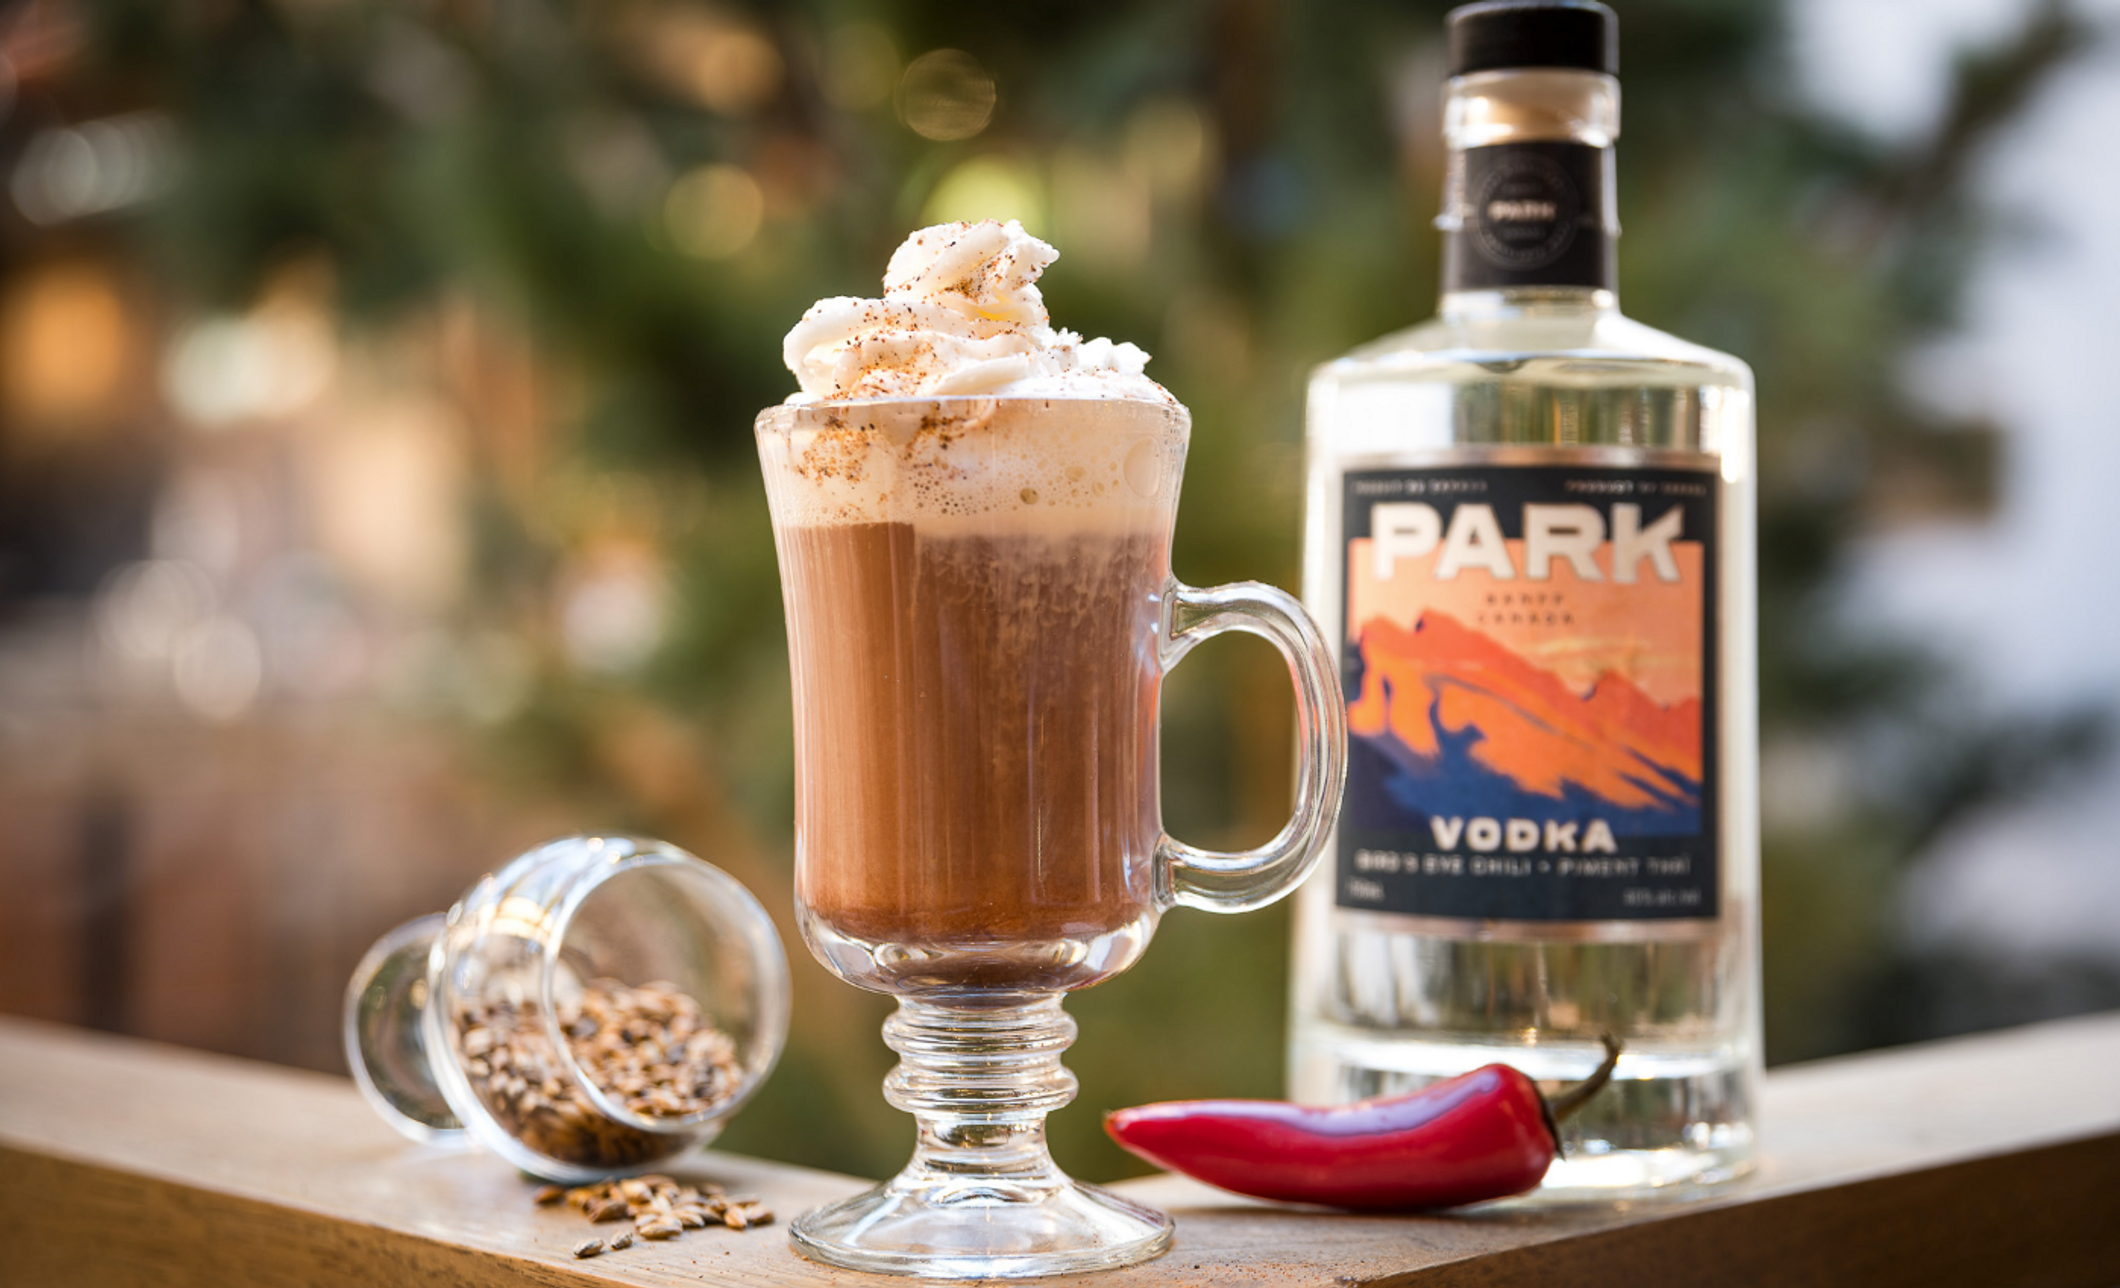 A hot chocolate beside a liquor bottle with a Christmas tree in the background.